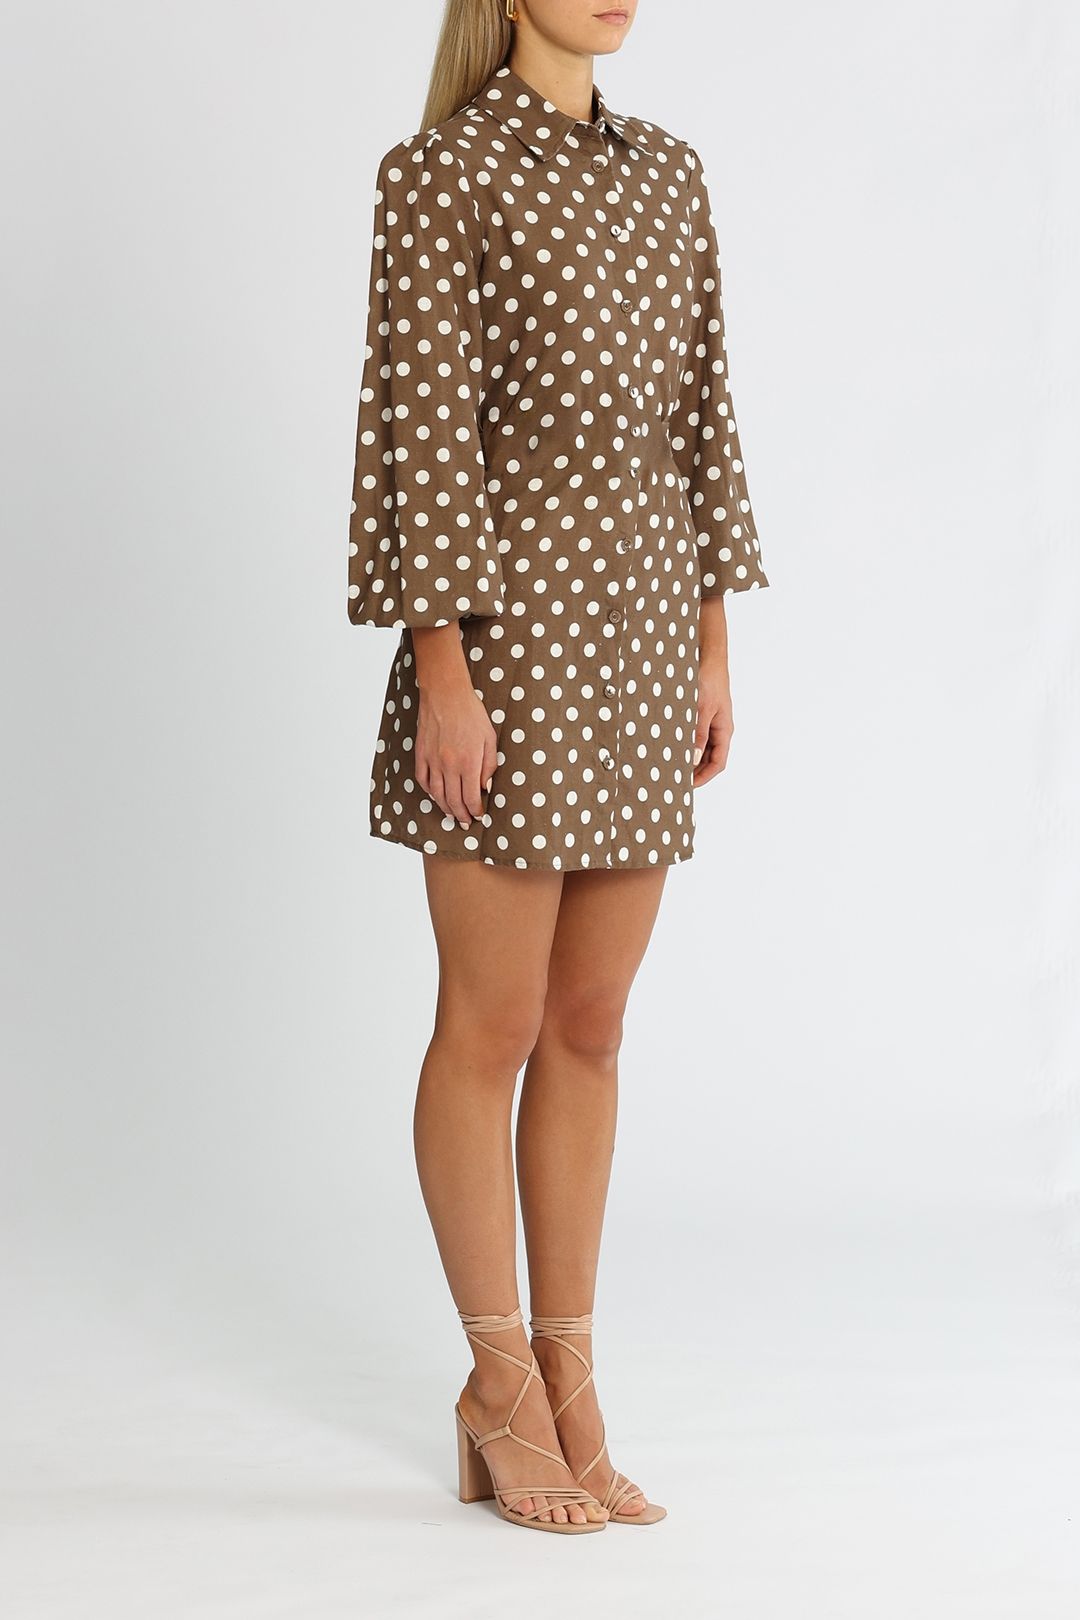 Charlie Holiday The Jaggar Mini Dress Brown Spot Collared